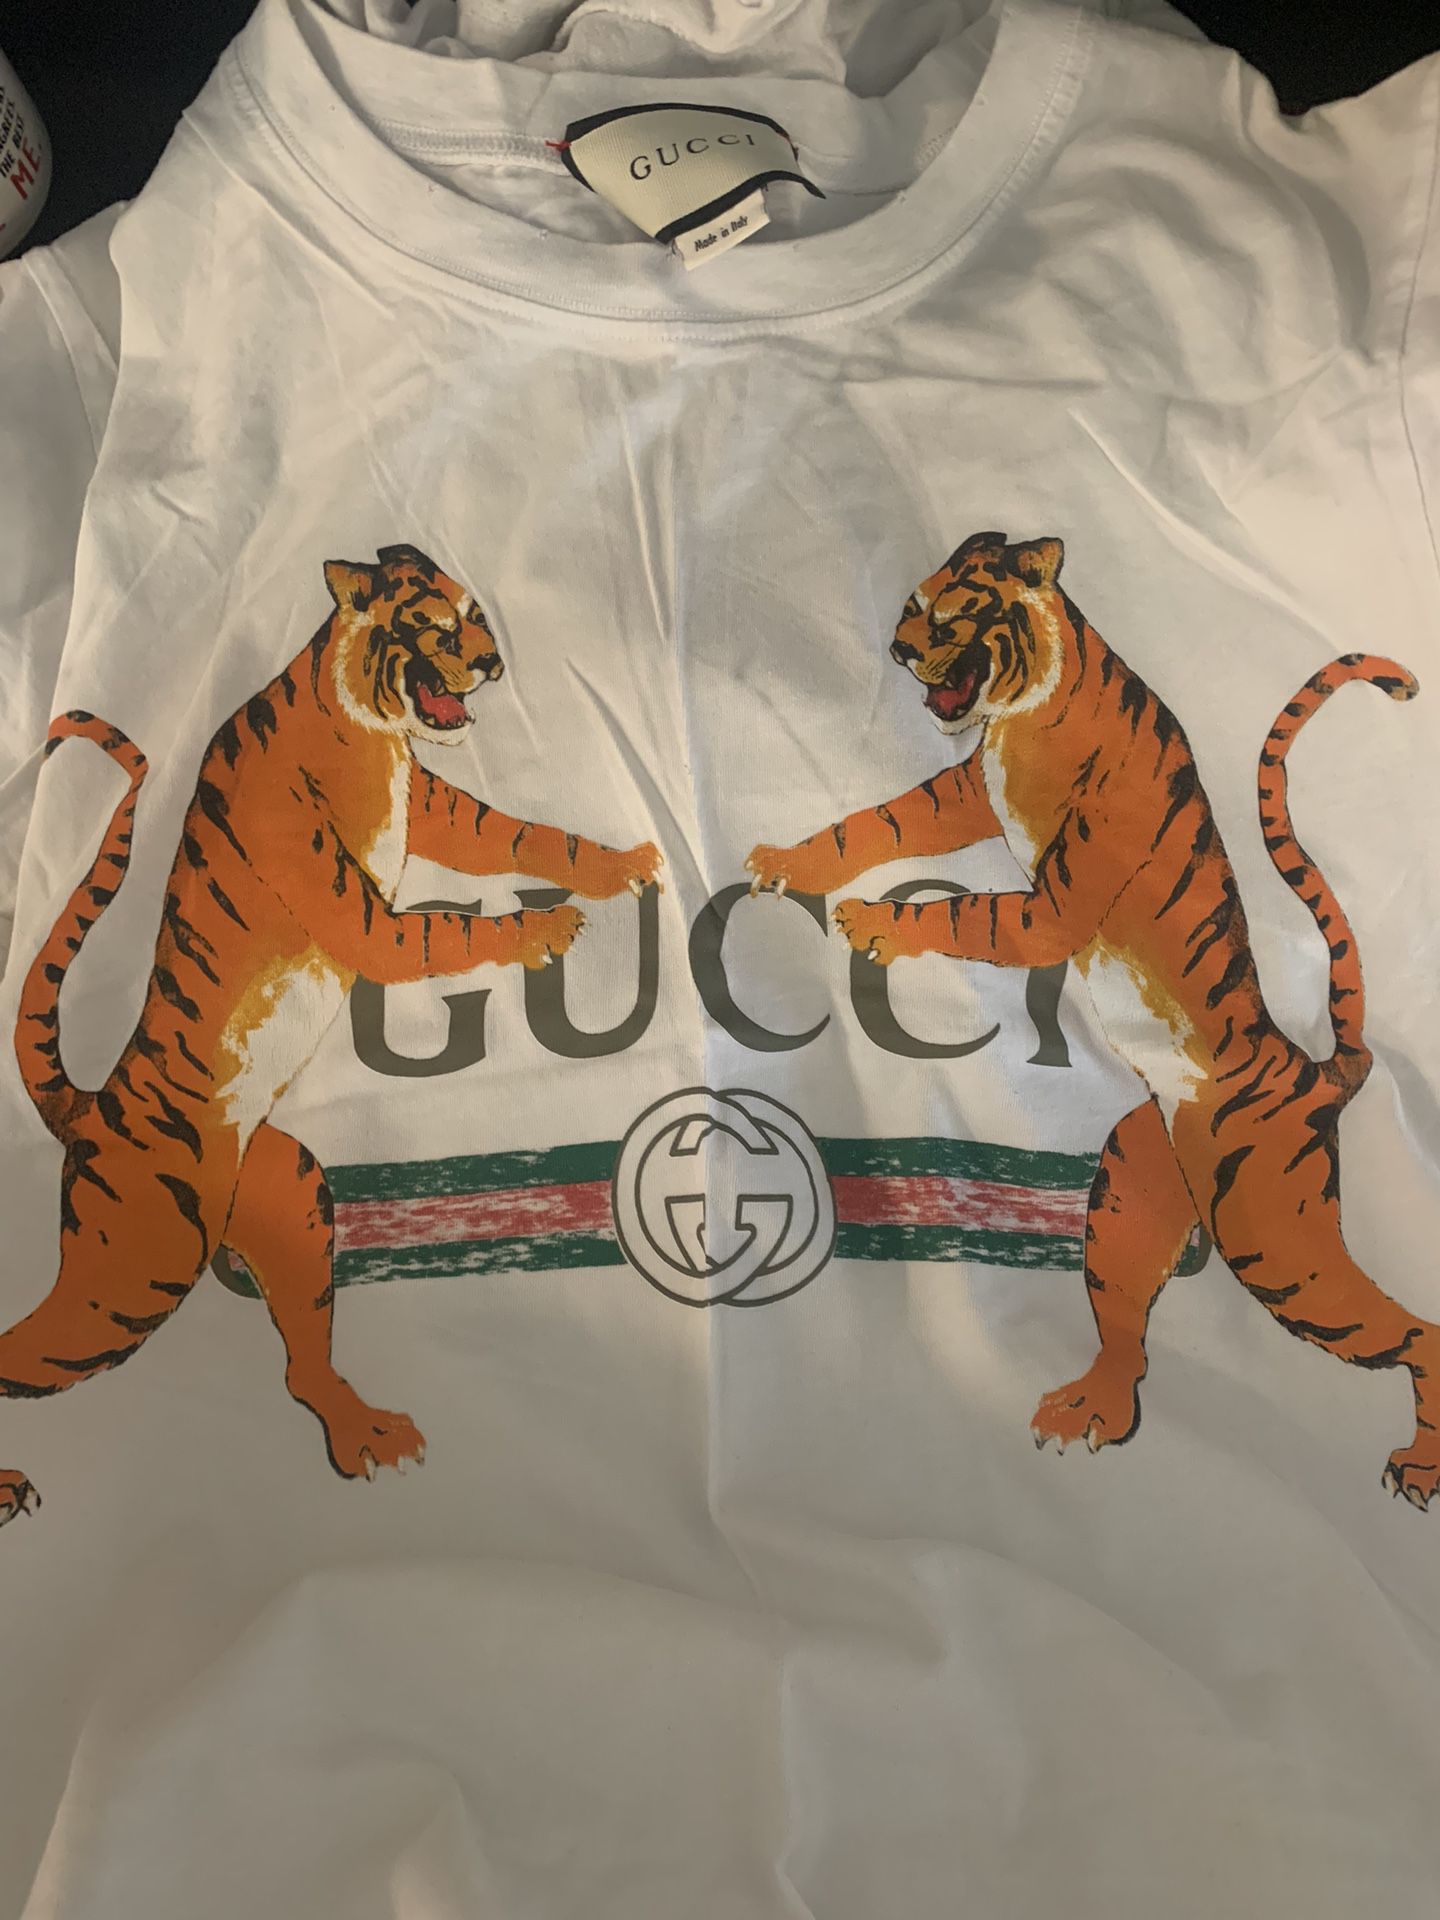 Gucci Tiger T-Shirt Authentic 